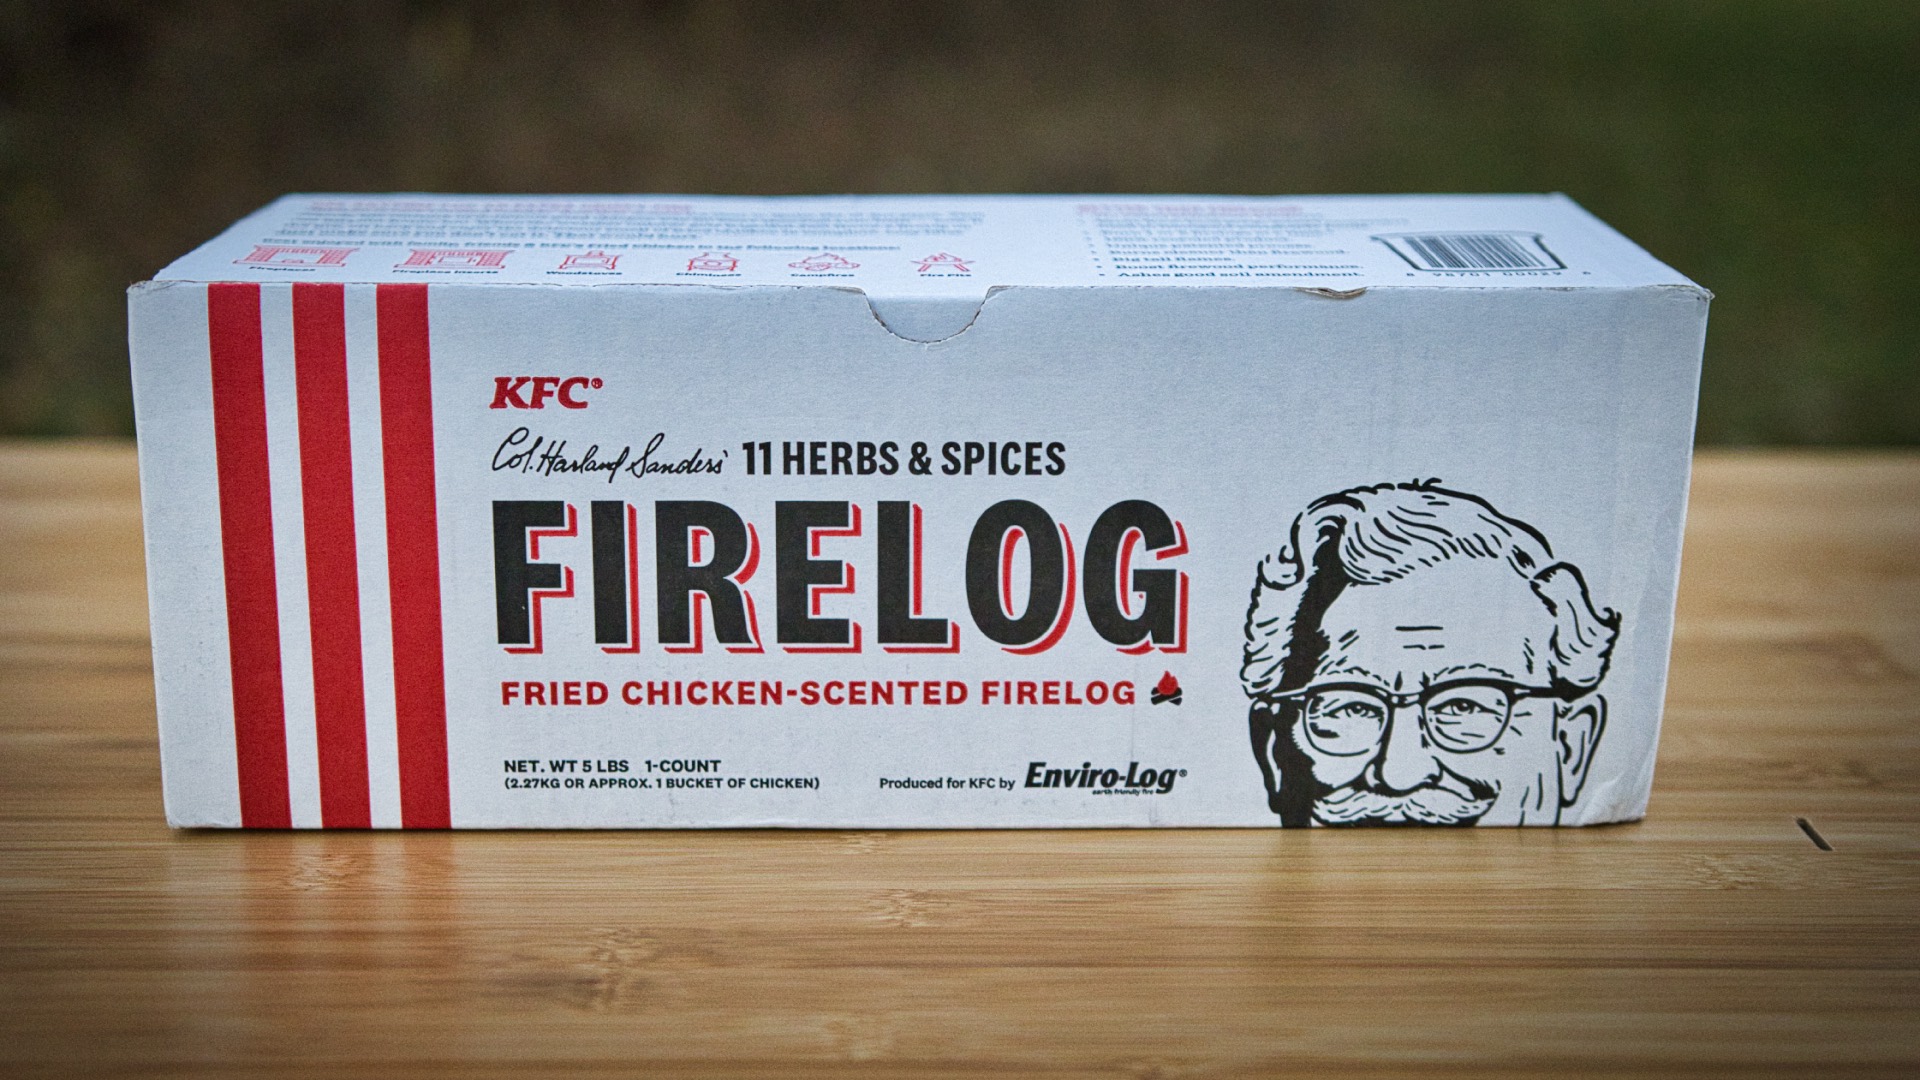 We Tried the KFC Firelog so You Don’t Have To